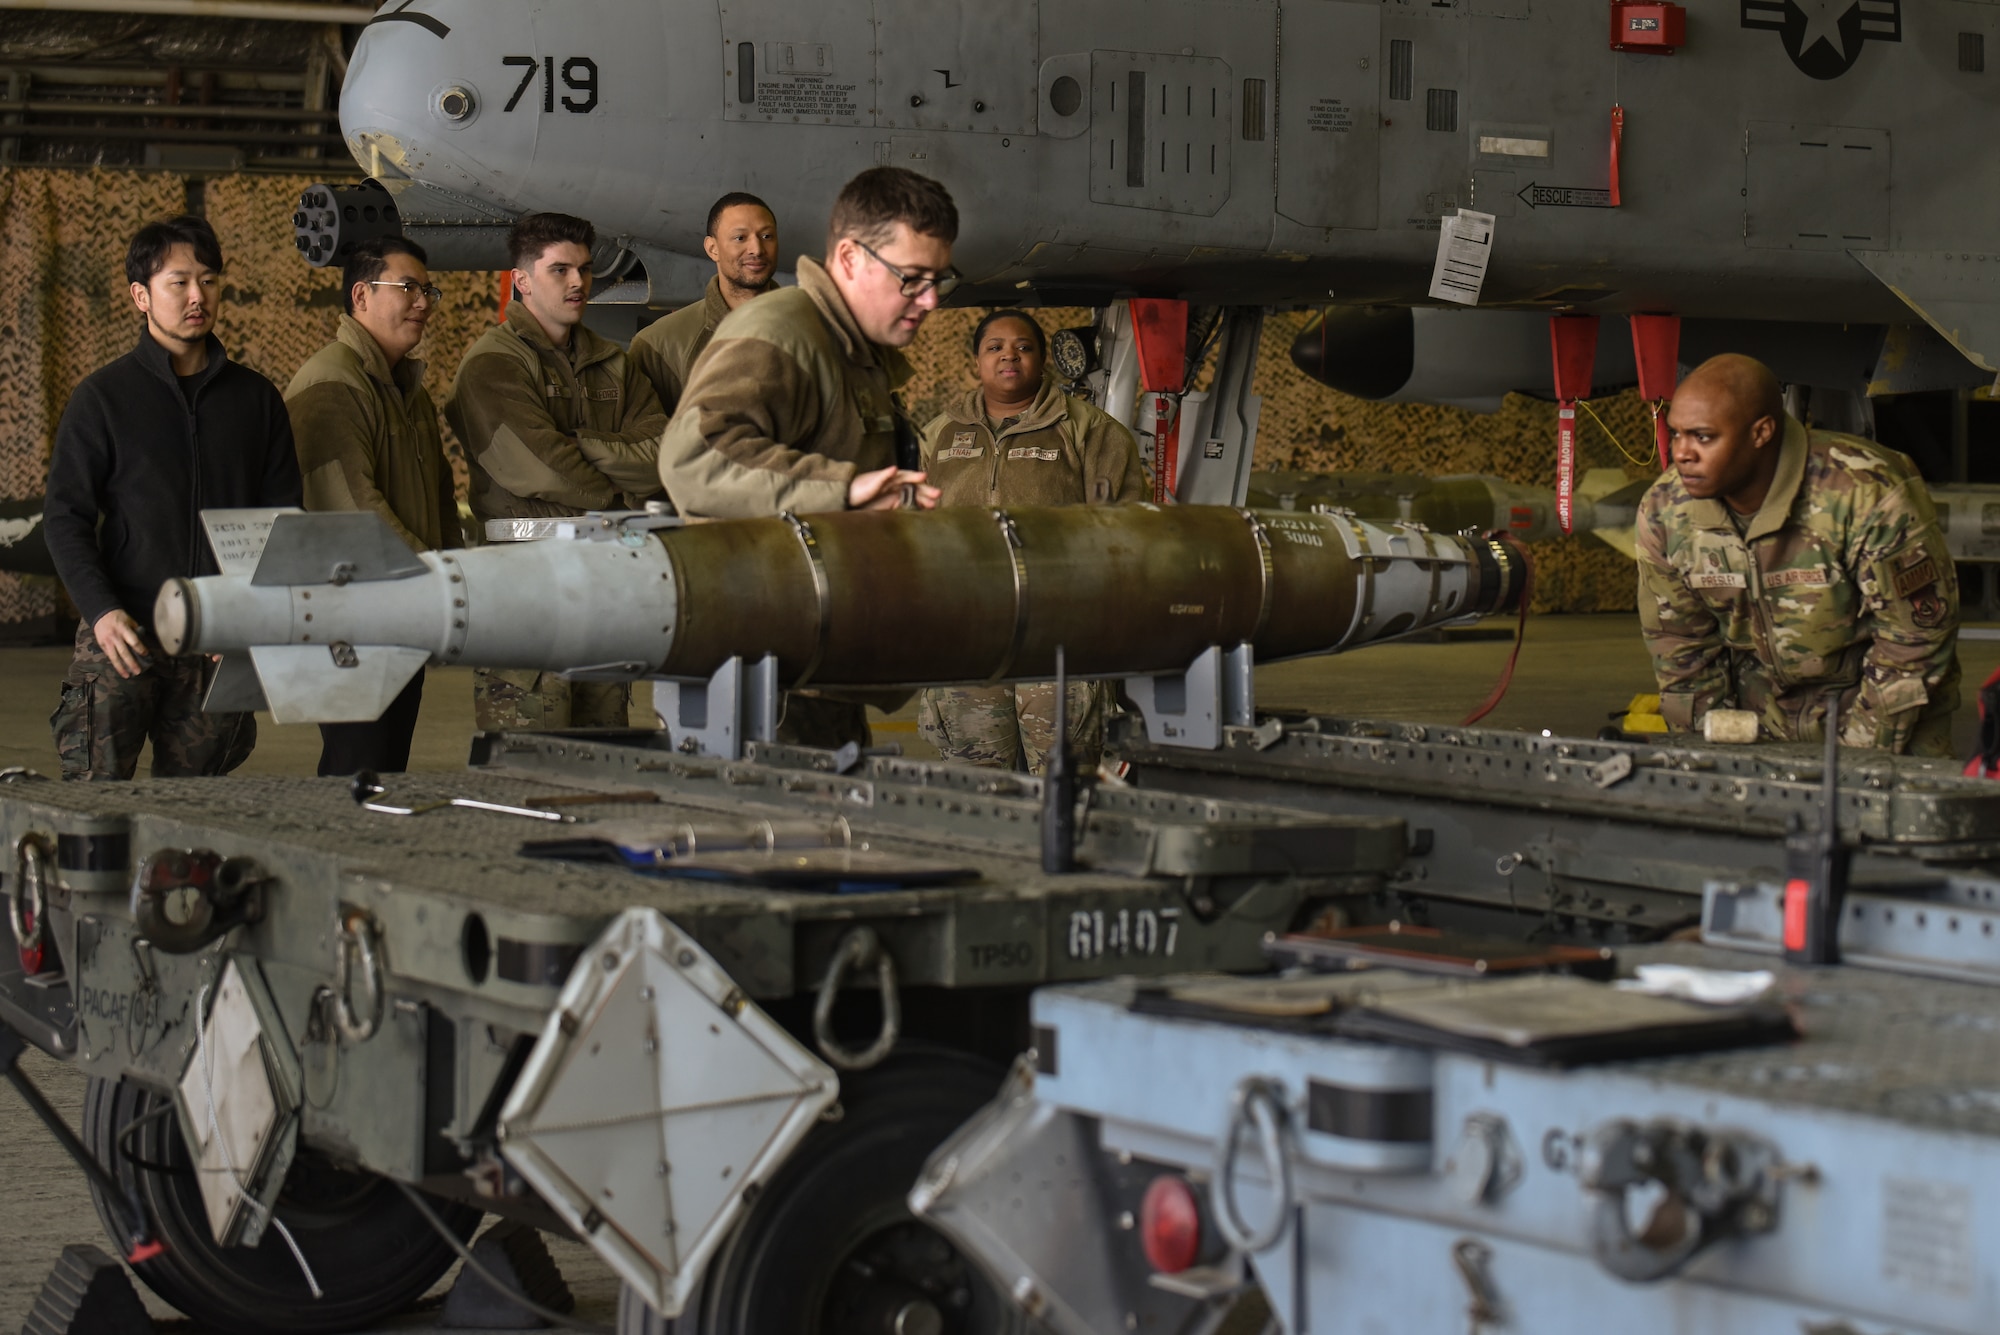 Evaluators from the 51st Munitions Squadron inspect a GBU-54 for technical accuracy during the annual Load Crew Competition at Osan Air Base, Republic of Korea, Jan. 19, 2024. As part of the process to determine the winning group, inspections are conducted to ensure technical accuracy. These competitions refine Airmen’s skills and problem-solving capabilities, ensuring they are at the top of their game when executing their mission. (U.S. Air Force photo by Senior Airman Brittany Russell)